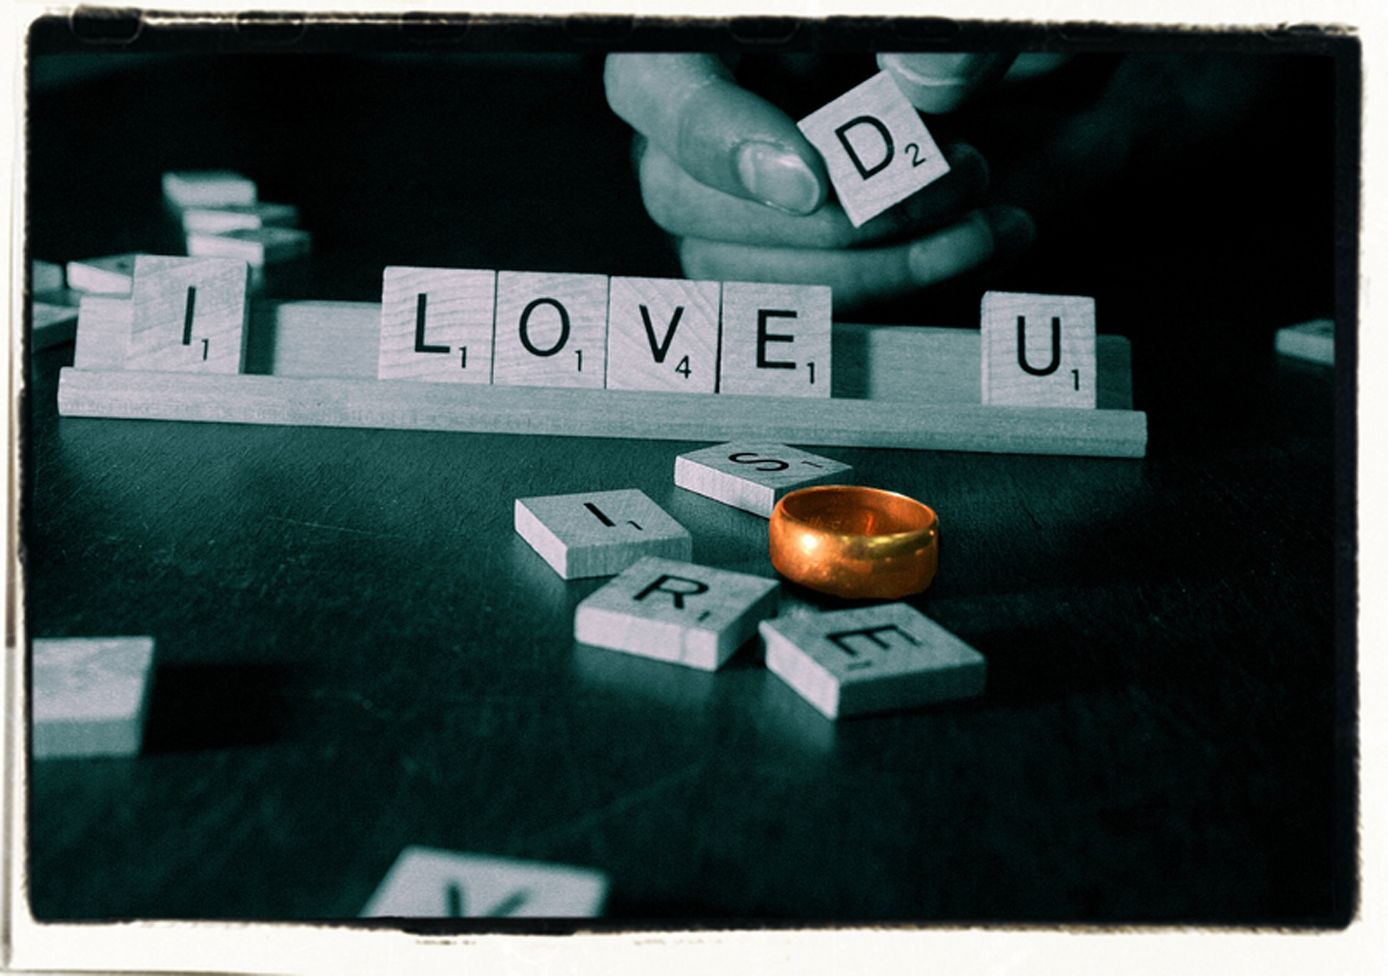 Download Wallpaper, Download 1600x1200 love letters scrabble 1388x976 wallpaper People HD Wallpaper, Hi Res People Wallpaper, High Definition Wallpaper